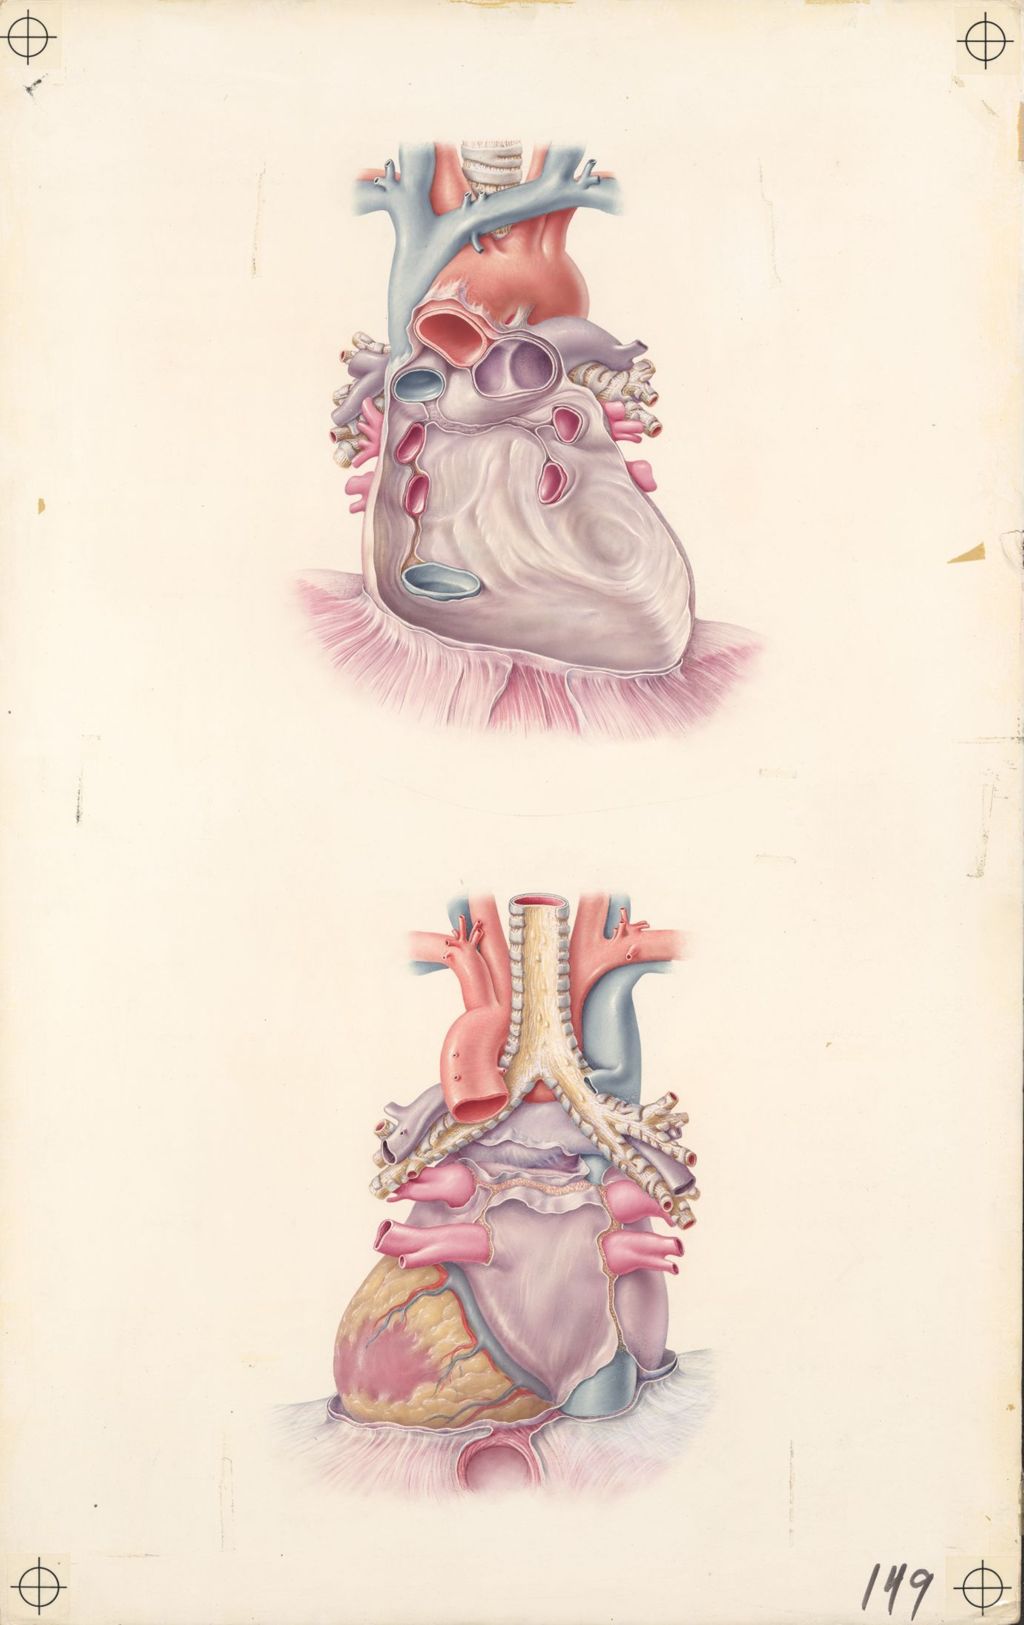 Views of the heart